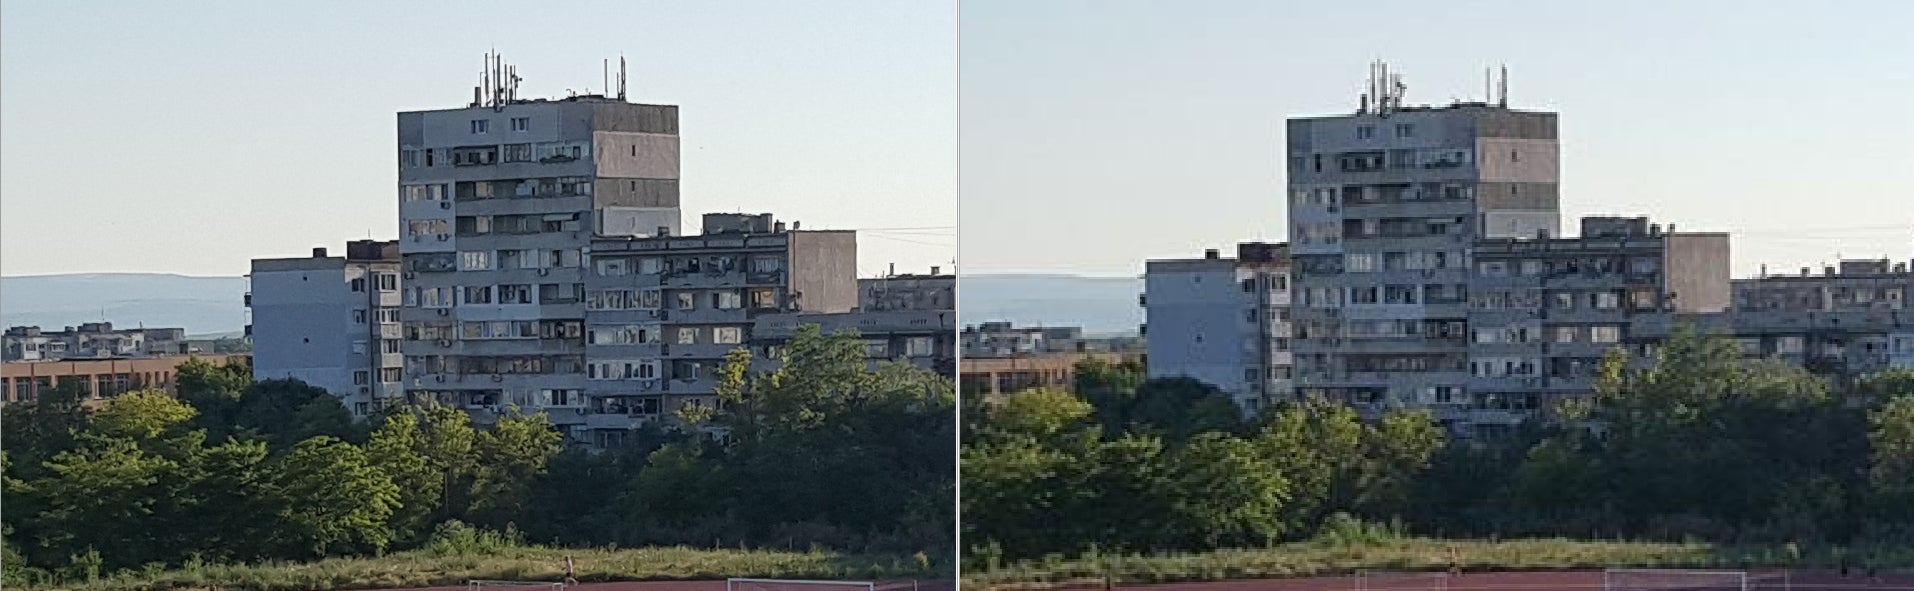 Original, full-sized image crop (left); same image uploaded to Facebook (right). Click to explore properly. - Here's why your camera's megapixel count is less important than you think